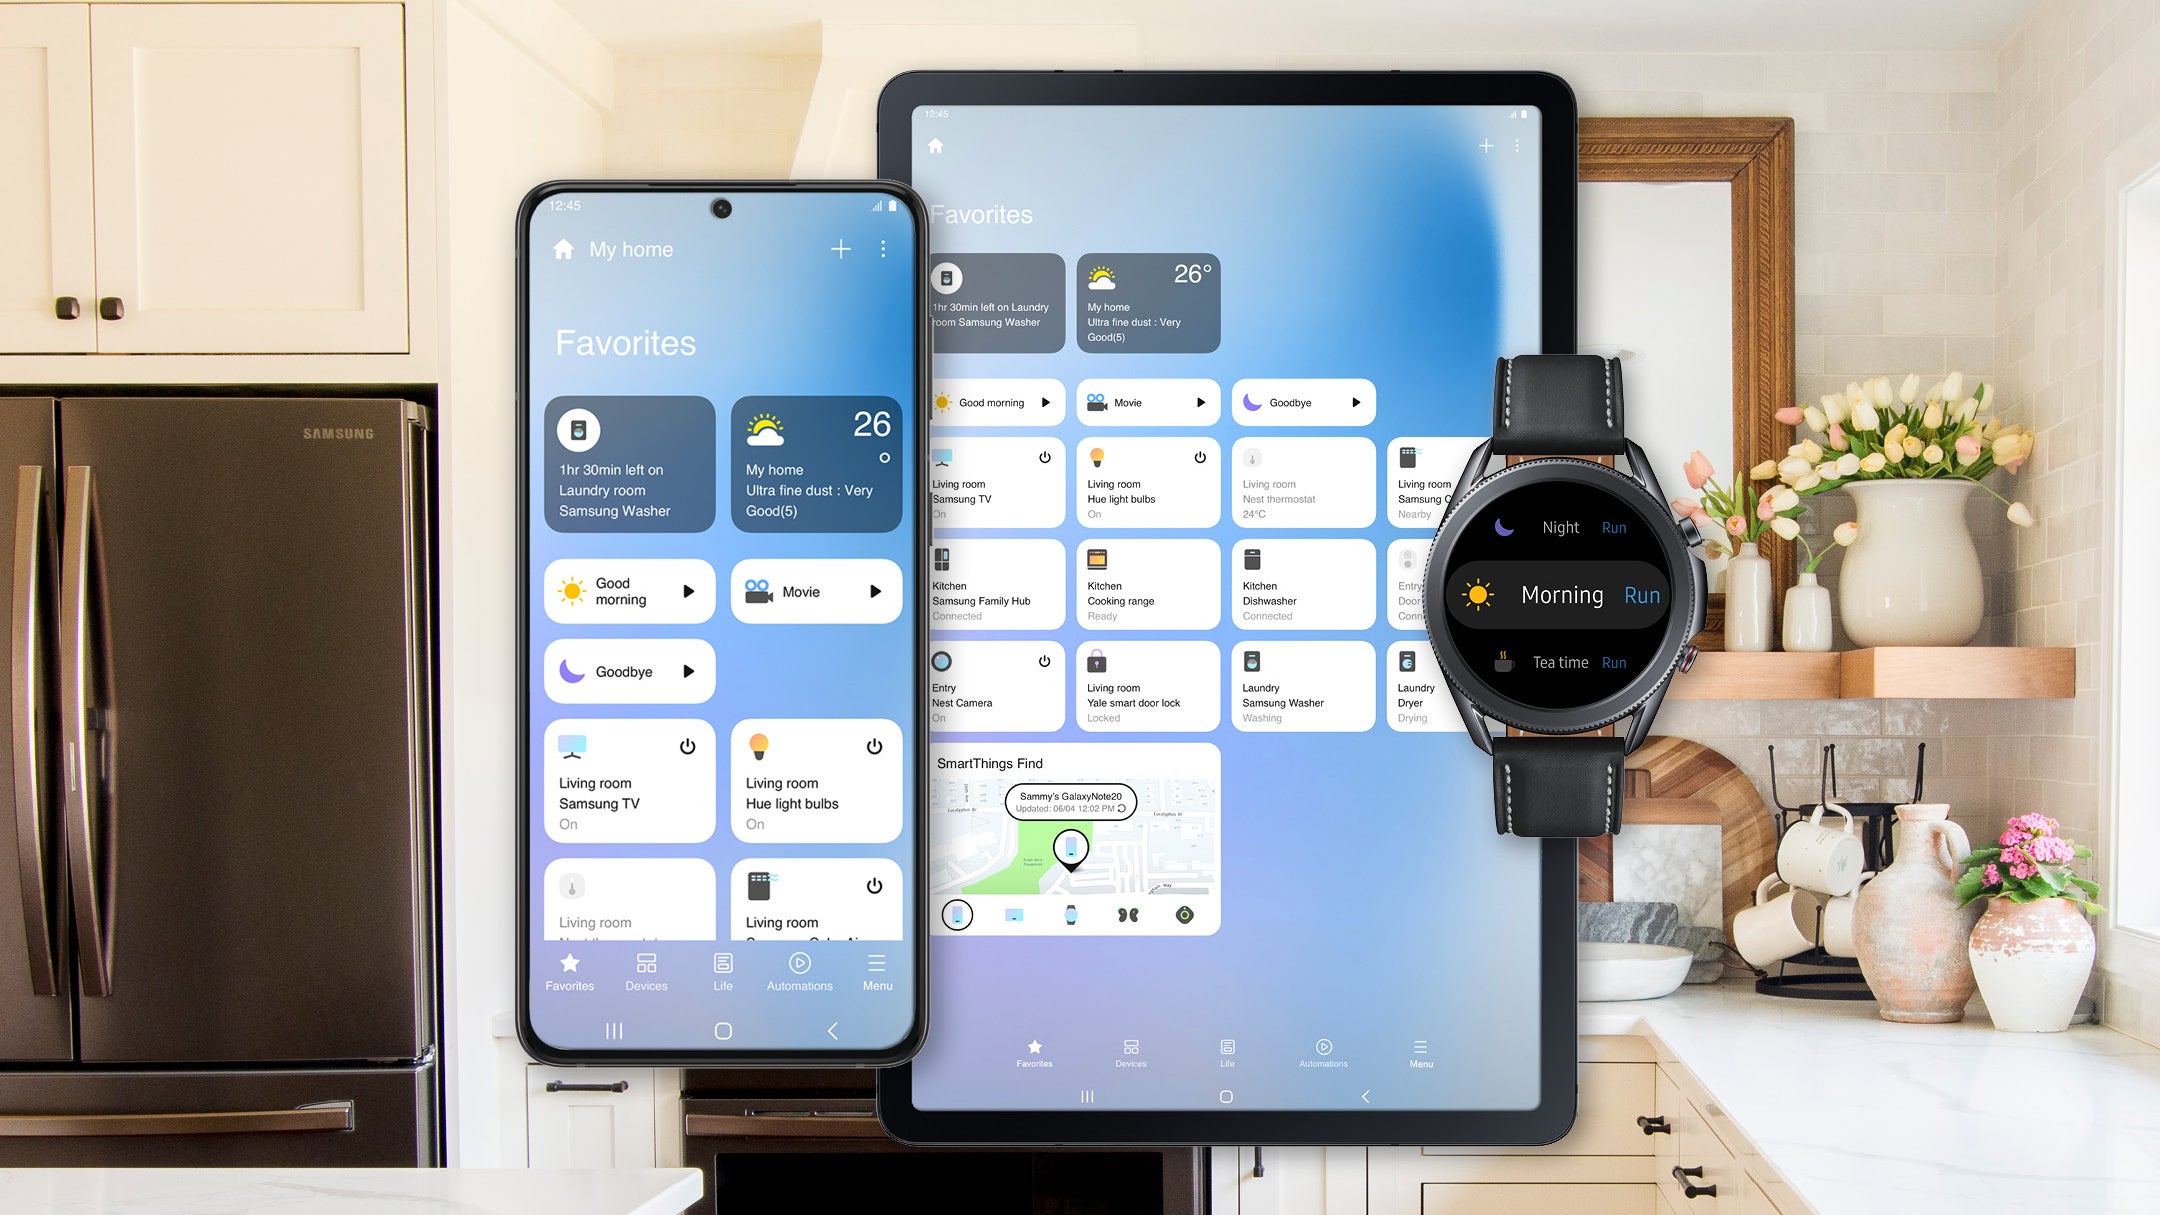 The new SmartThings interface. (Image: Samsung)